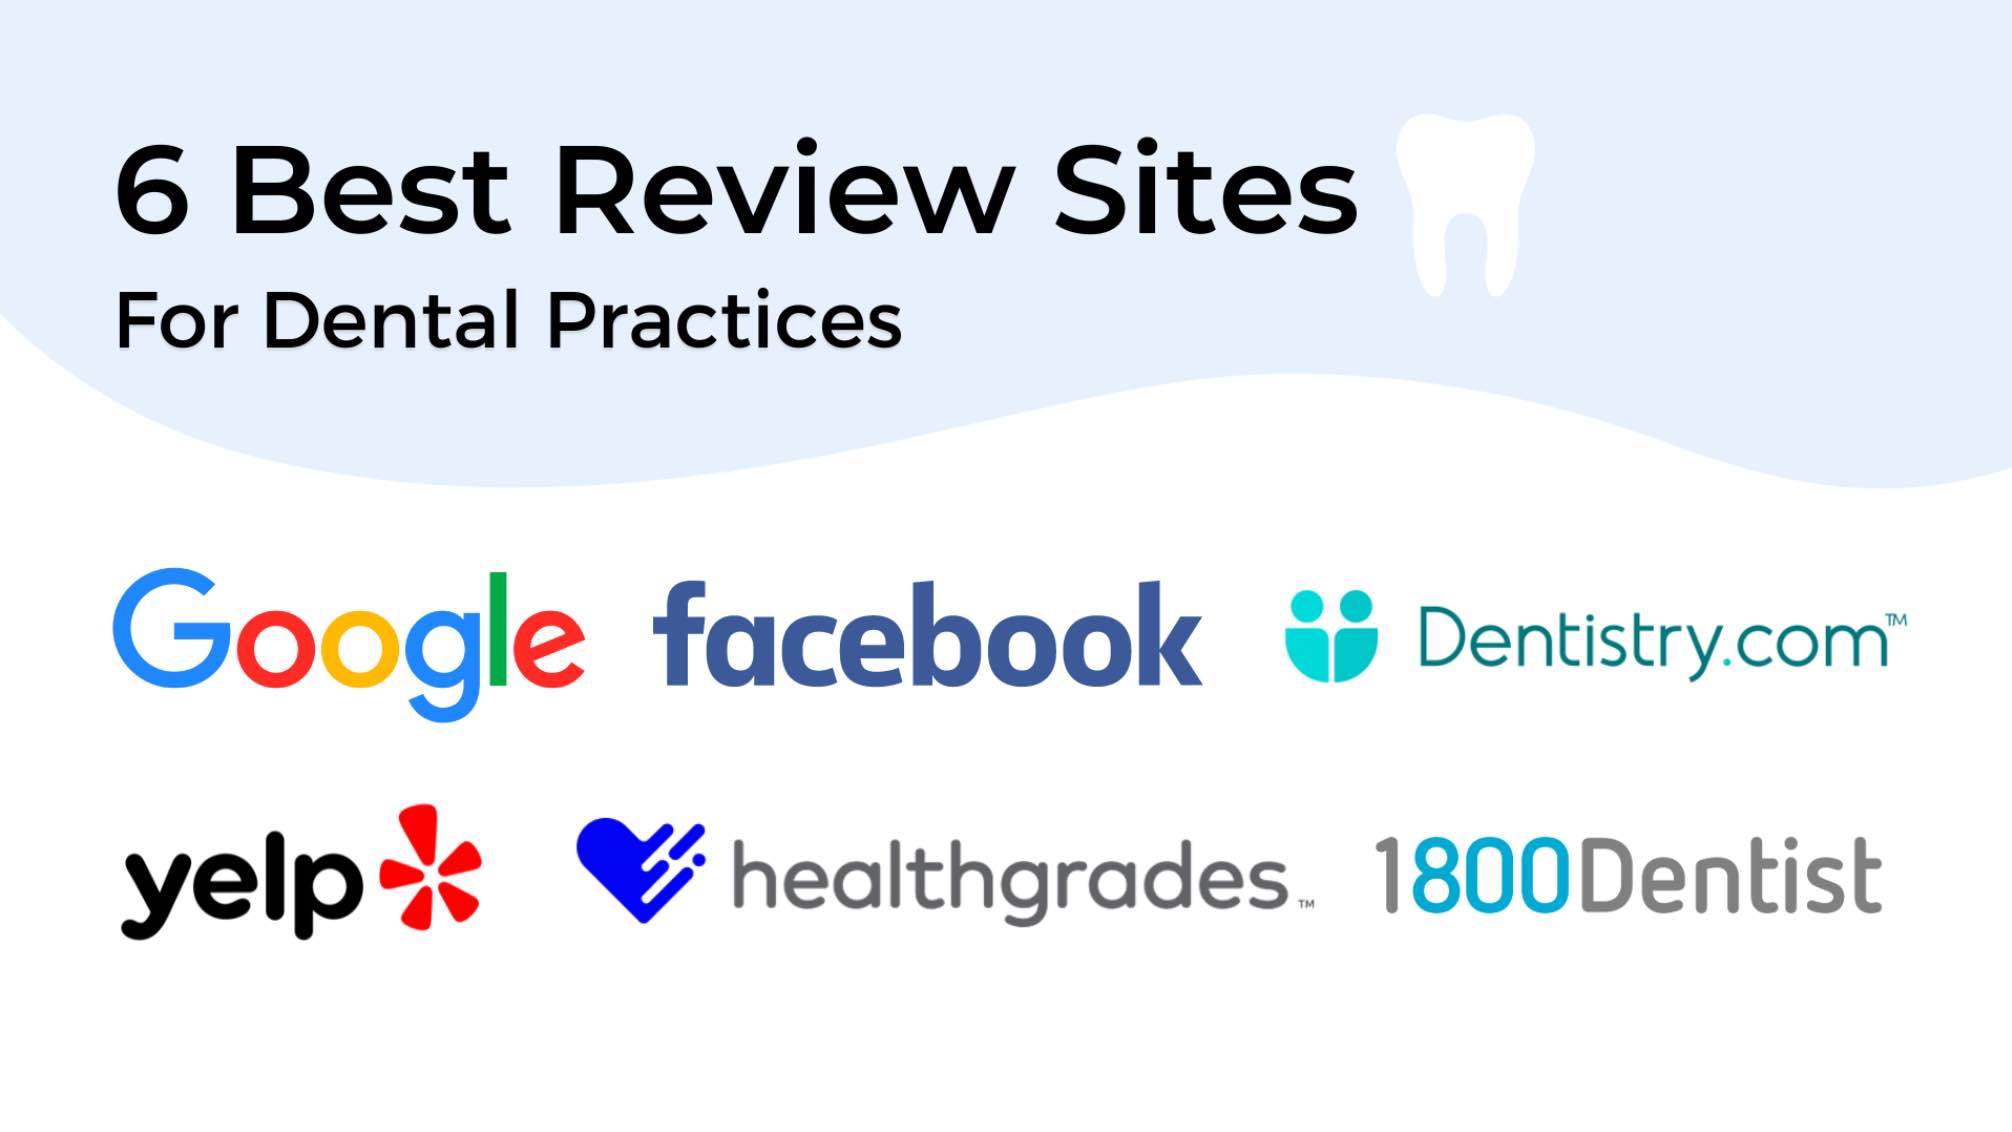 6 Best Review Sites for Dental Practices